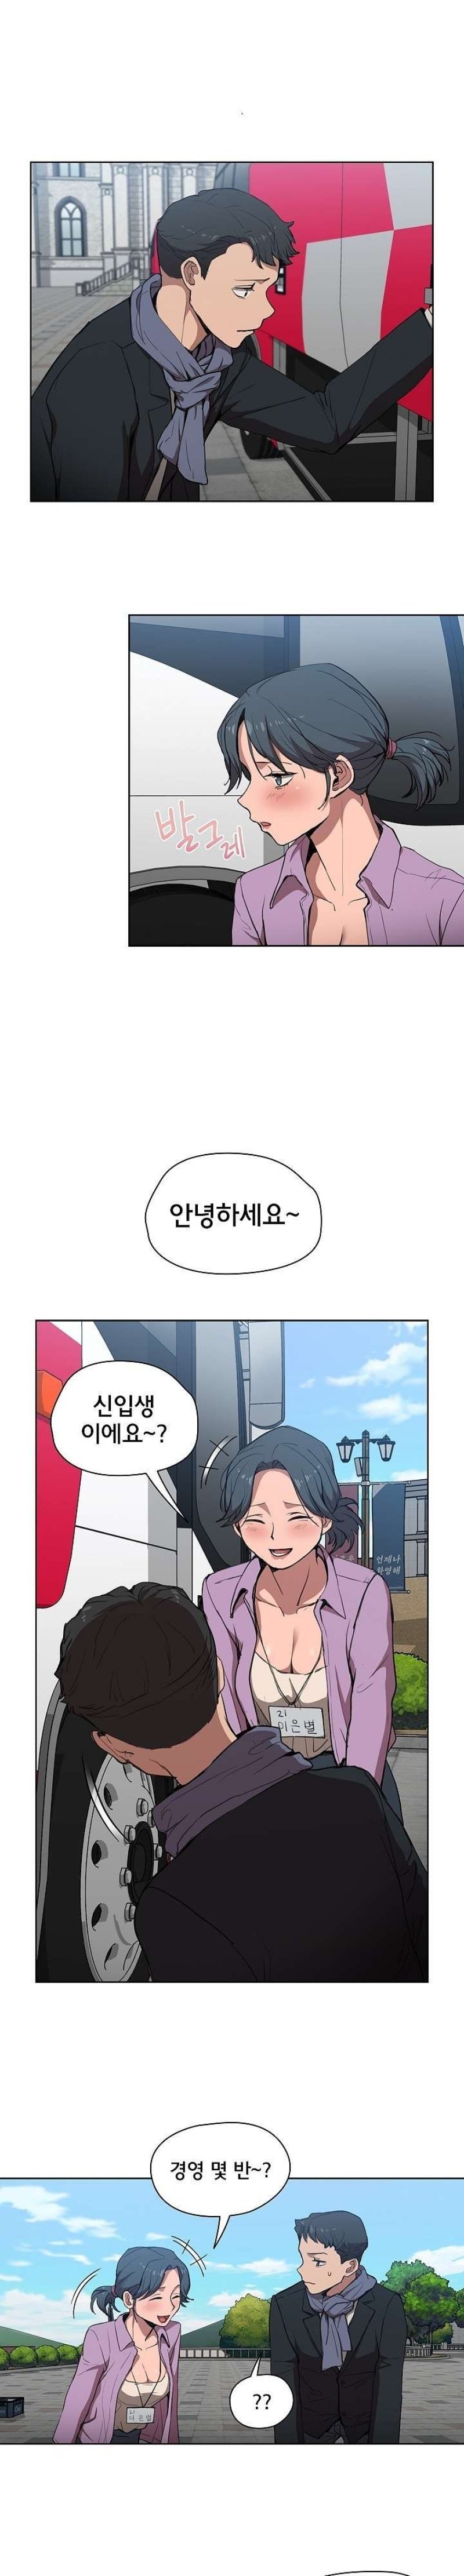 how-about-getting-lost-raw-chap-32-1